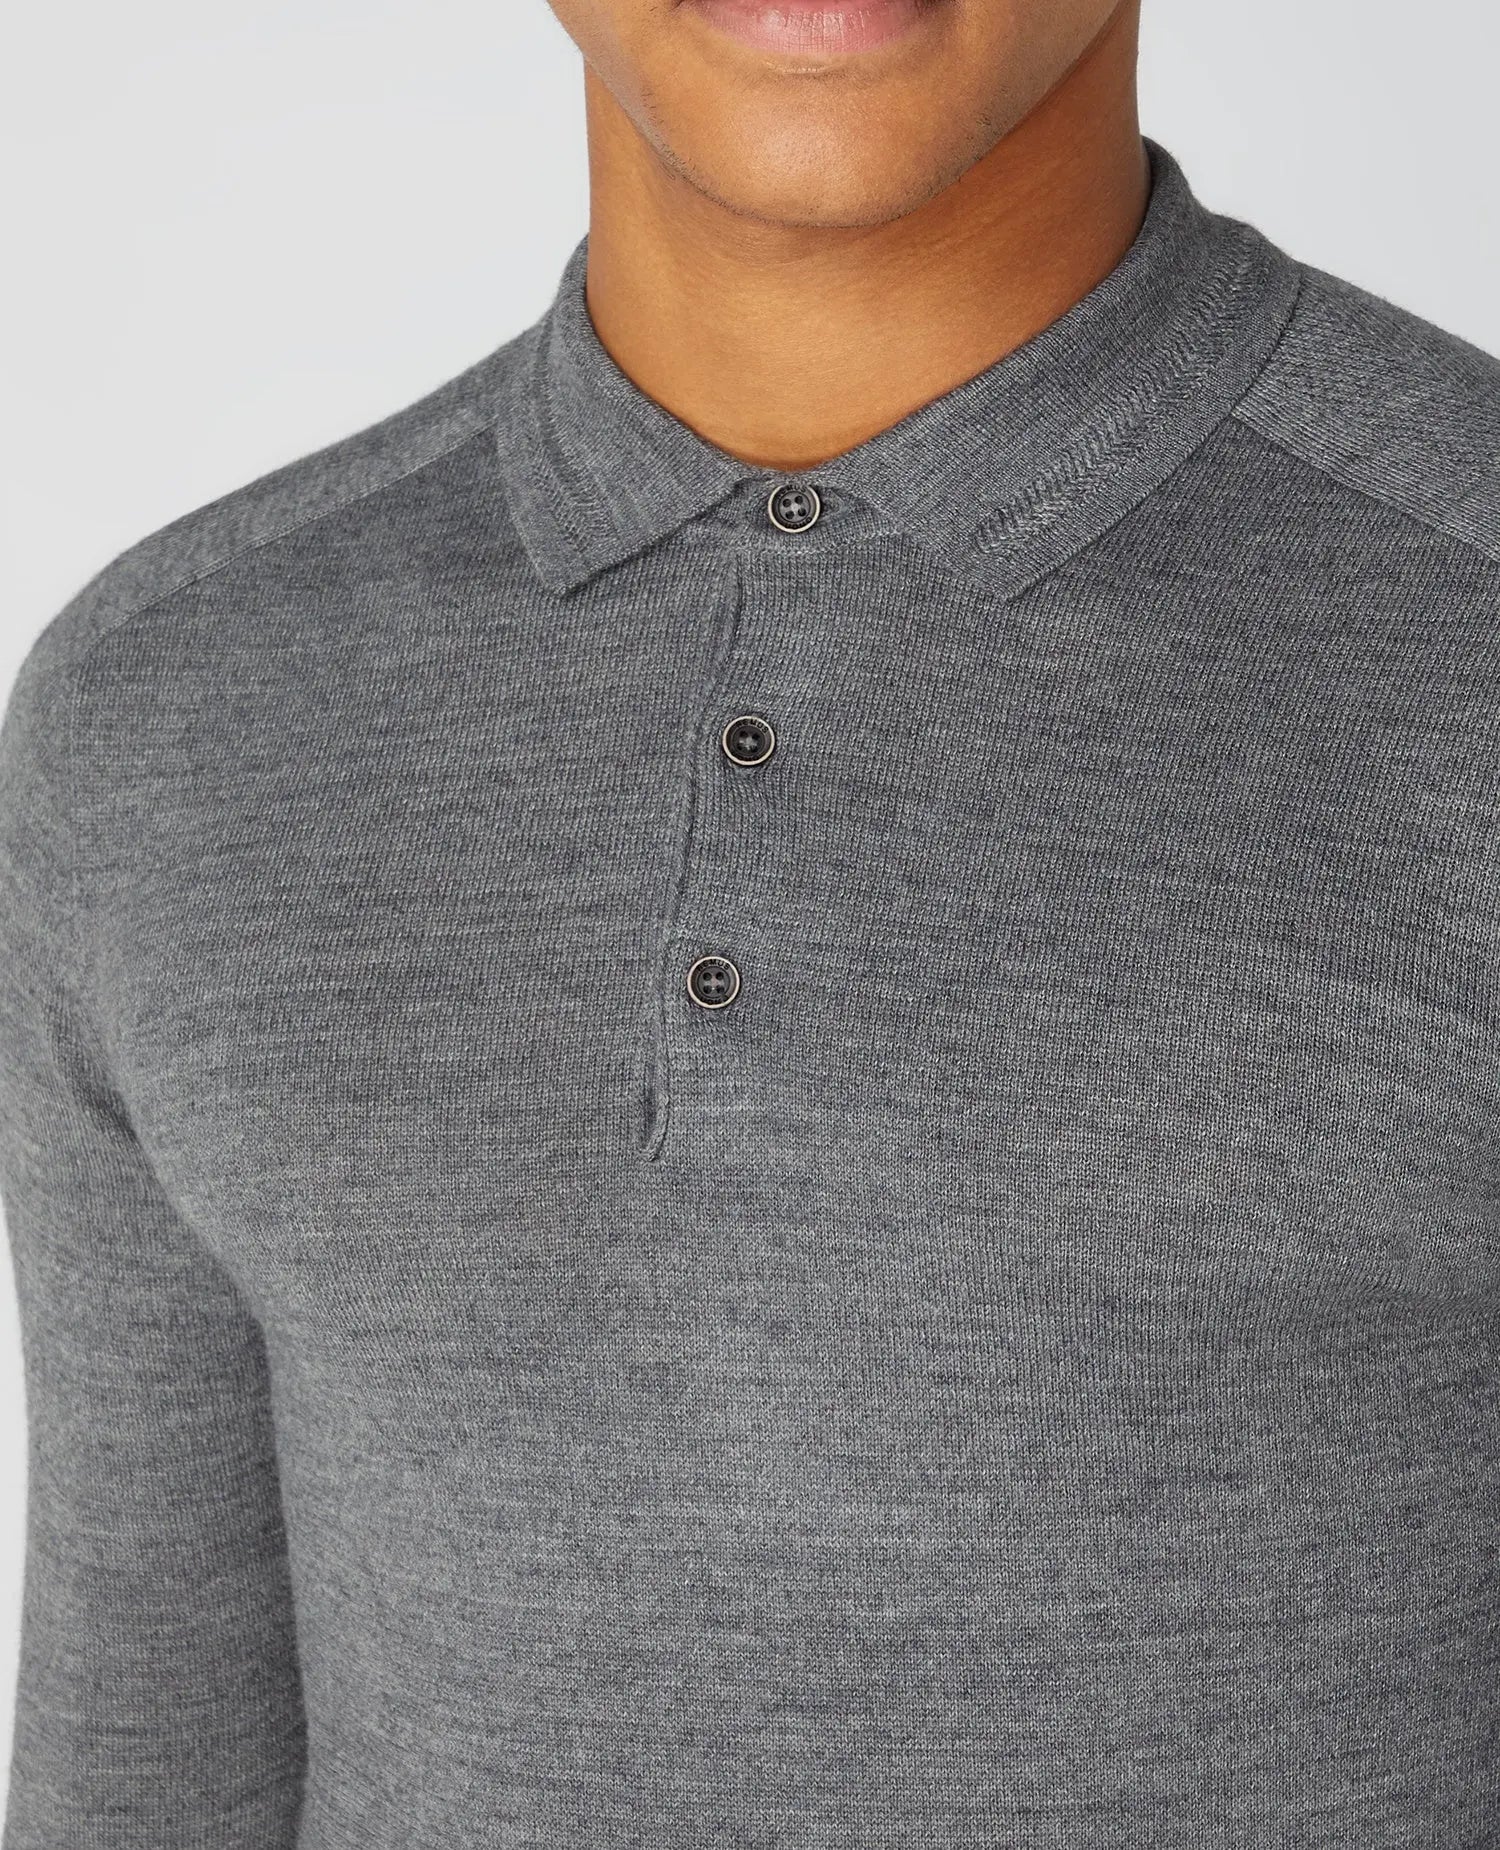 Remus Uomo Long Sleeve Knit Polo - Dark Grey From Woven Durham